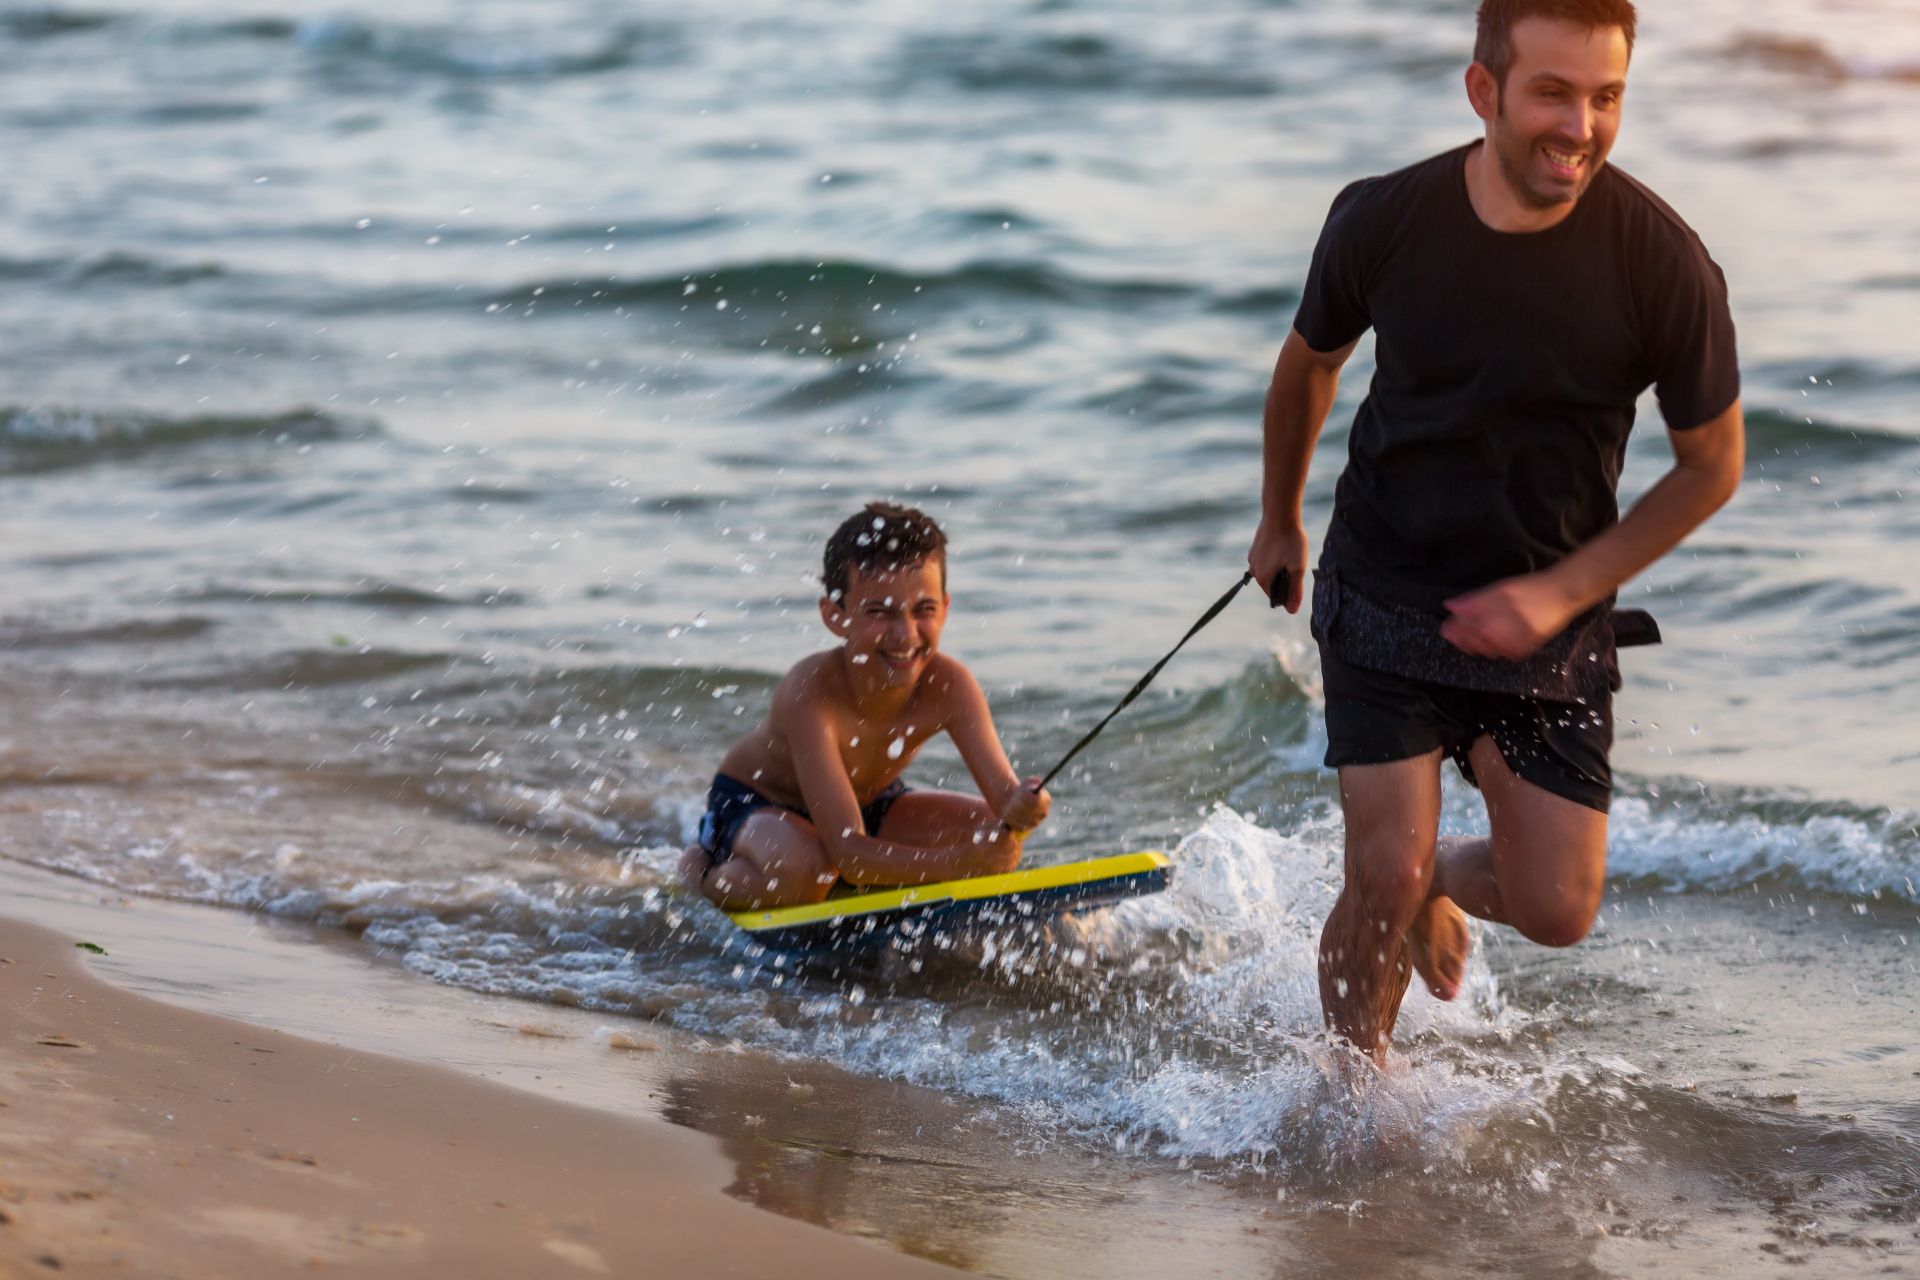 A young boy being pulled on a paddleboard in the waters on a beach by an older boy. He is laughing and enjoying himself